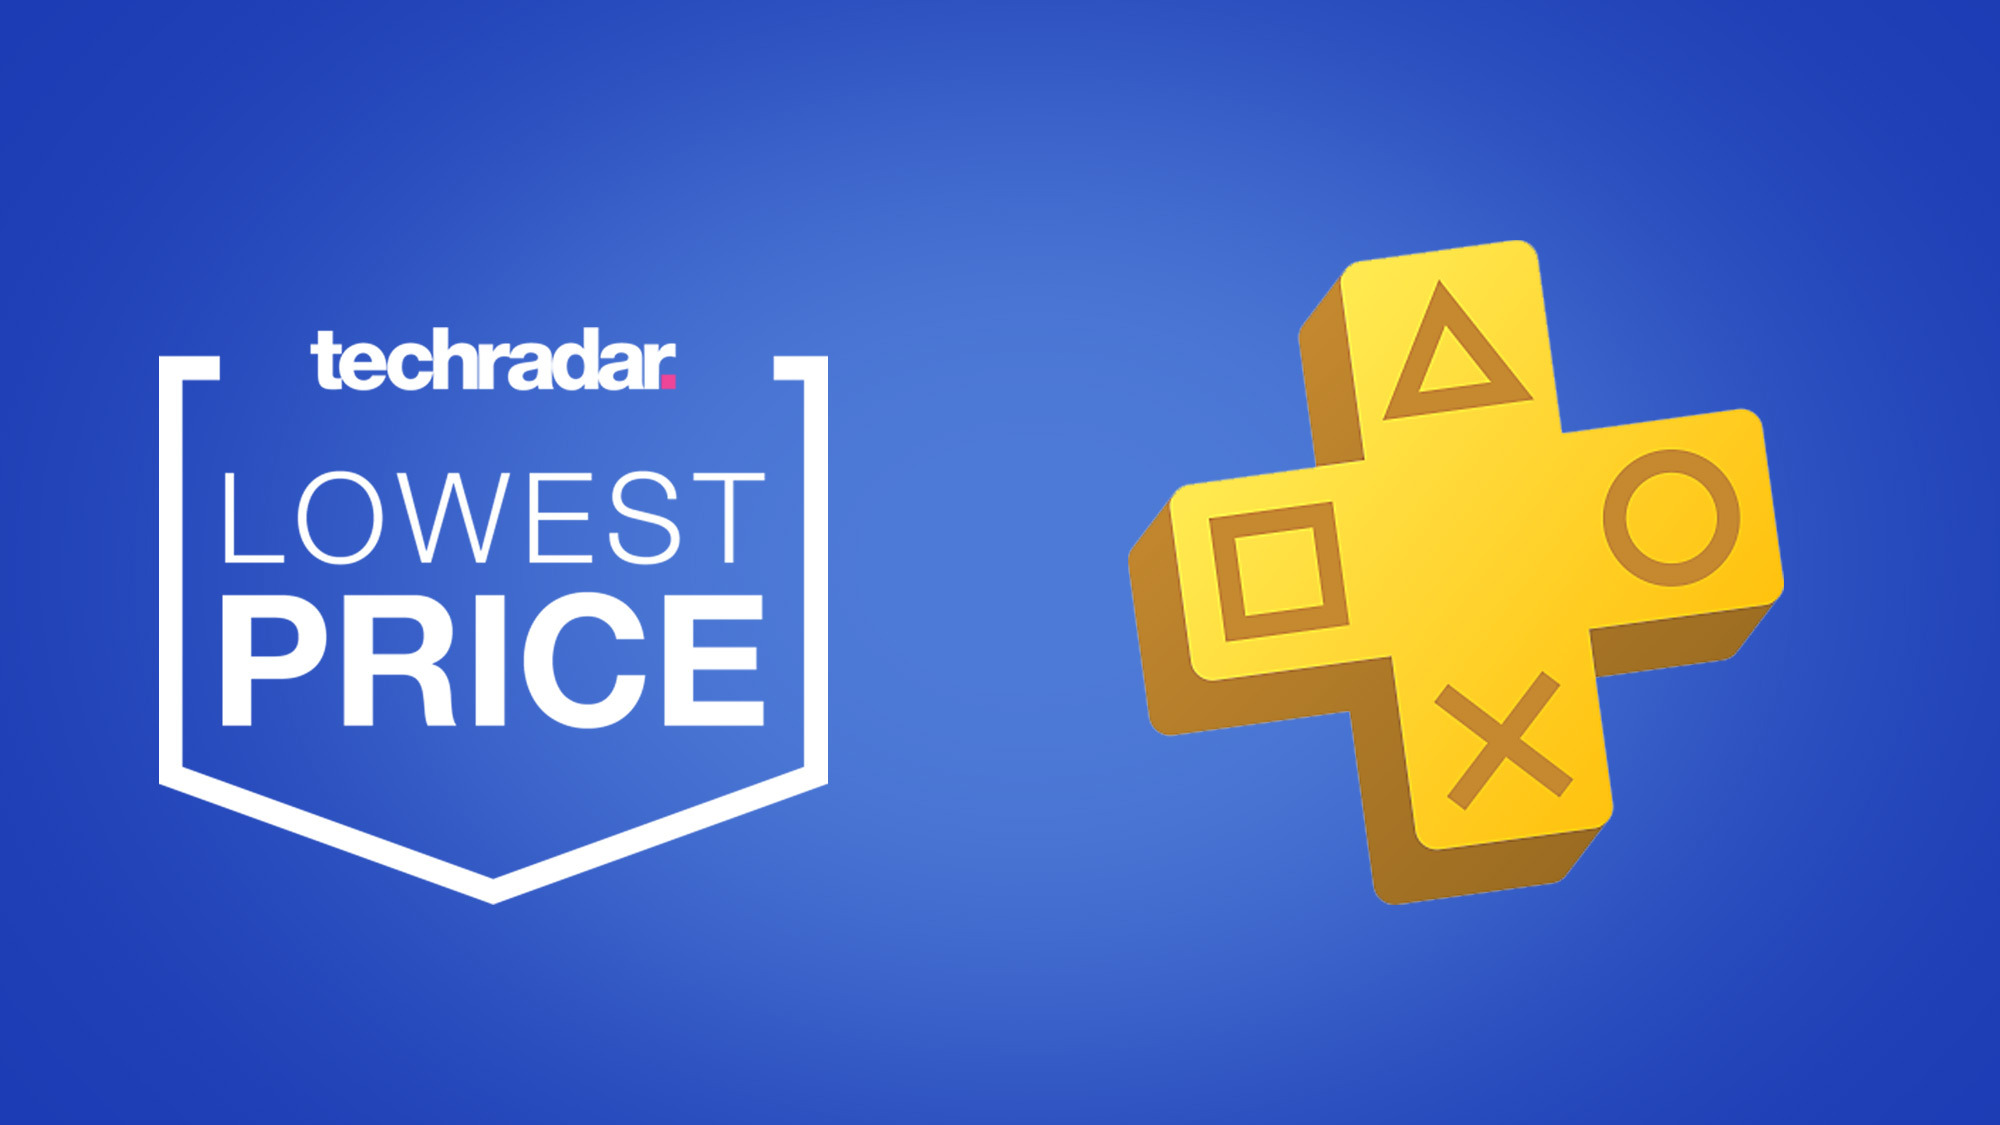 Sony reinvents PlayStation Plus, offers PC streaming exclusively at Premium  price tier